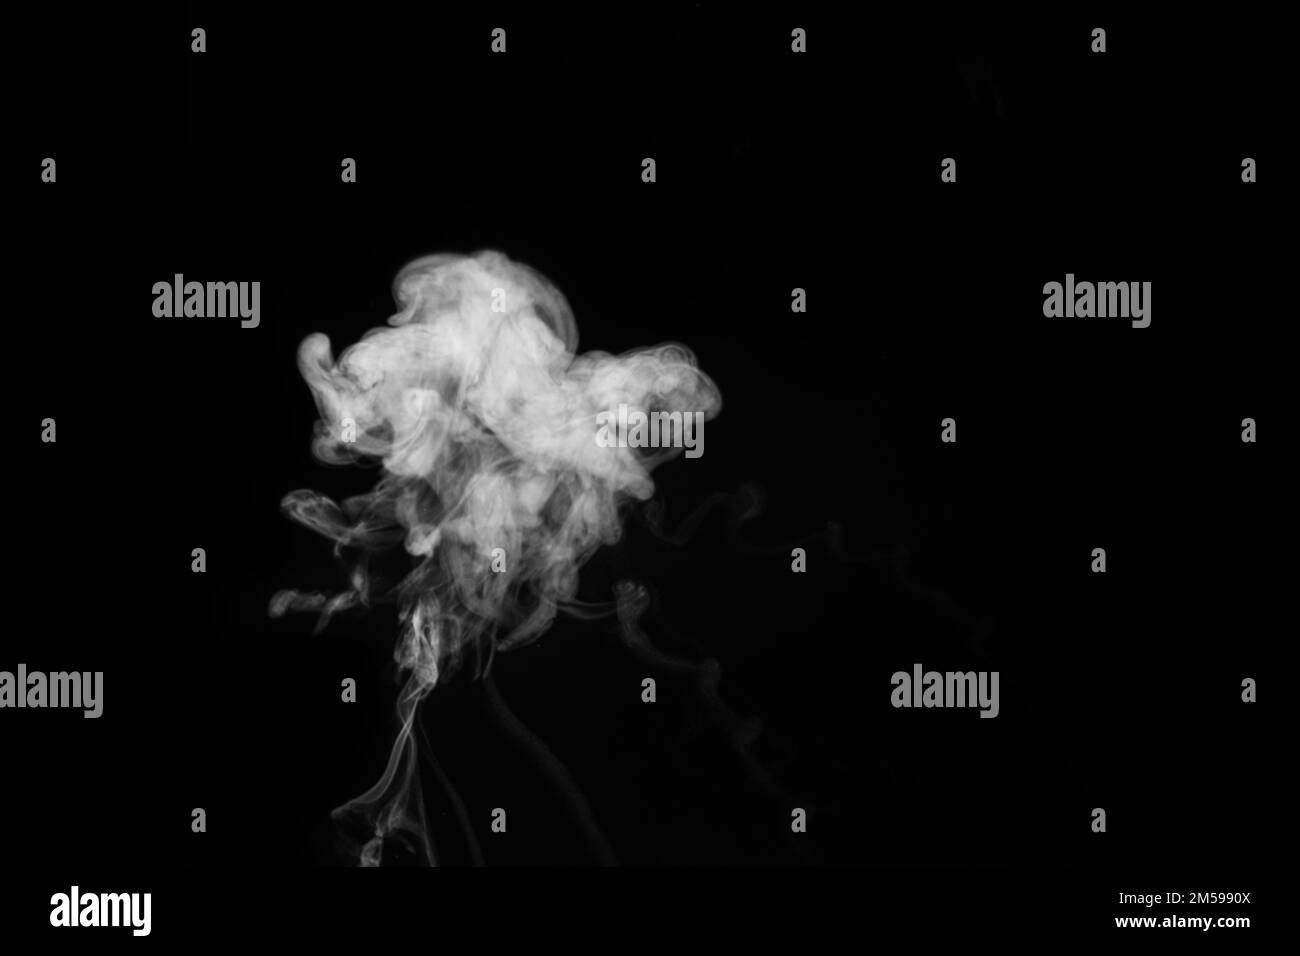 White smoke vapor in the form of a flying cloud is isolated on a black background to overlay your photos. Smoky background. Design element Stock Photo